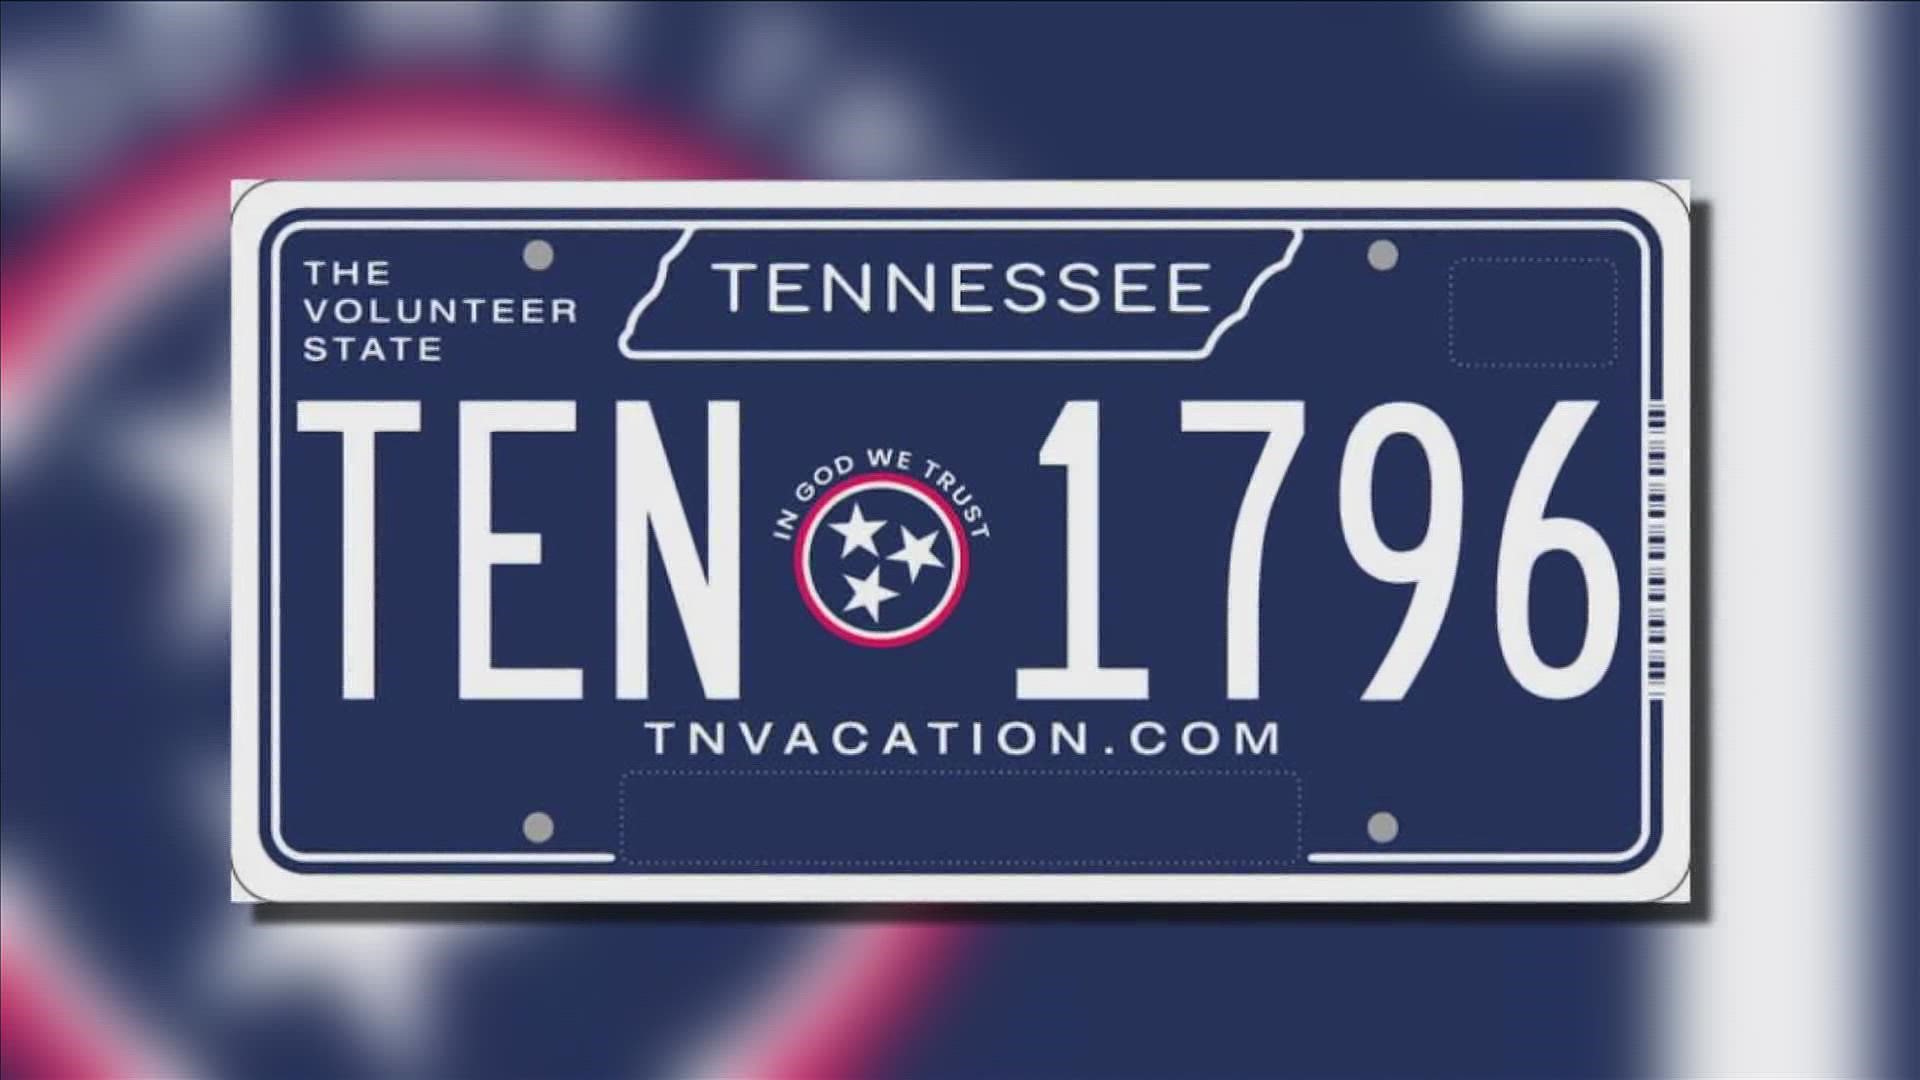 The new license plates are the first official redesign since 2006. The phrase "In God We Trust" was first introduced as an option in 2017.